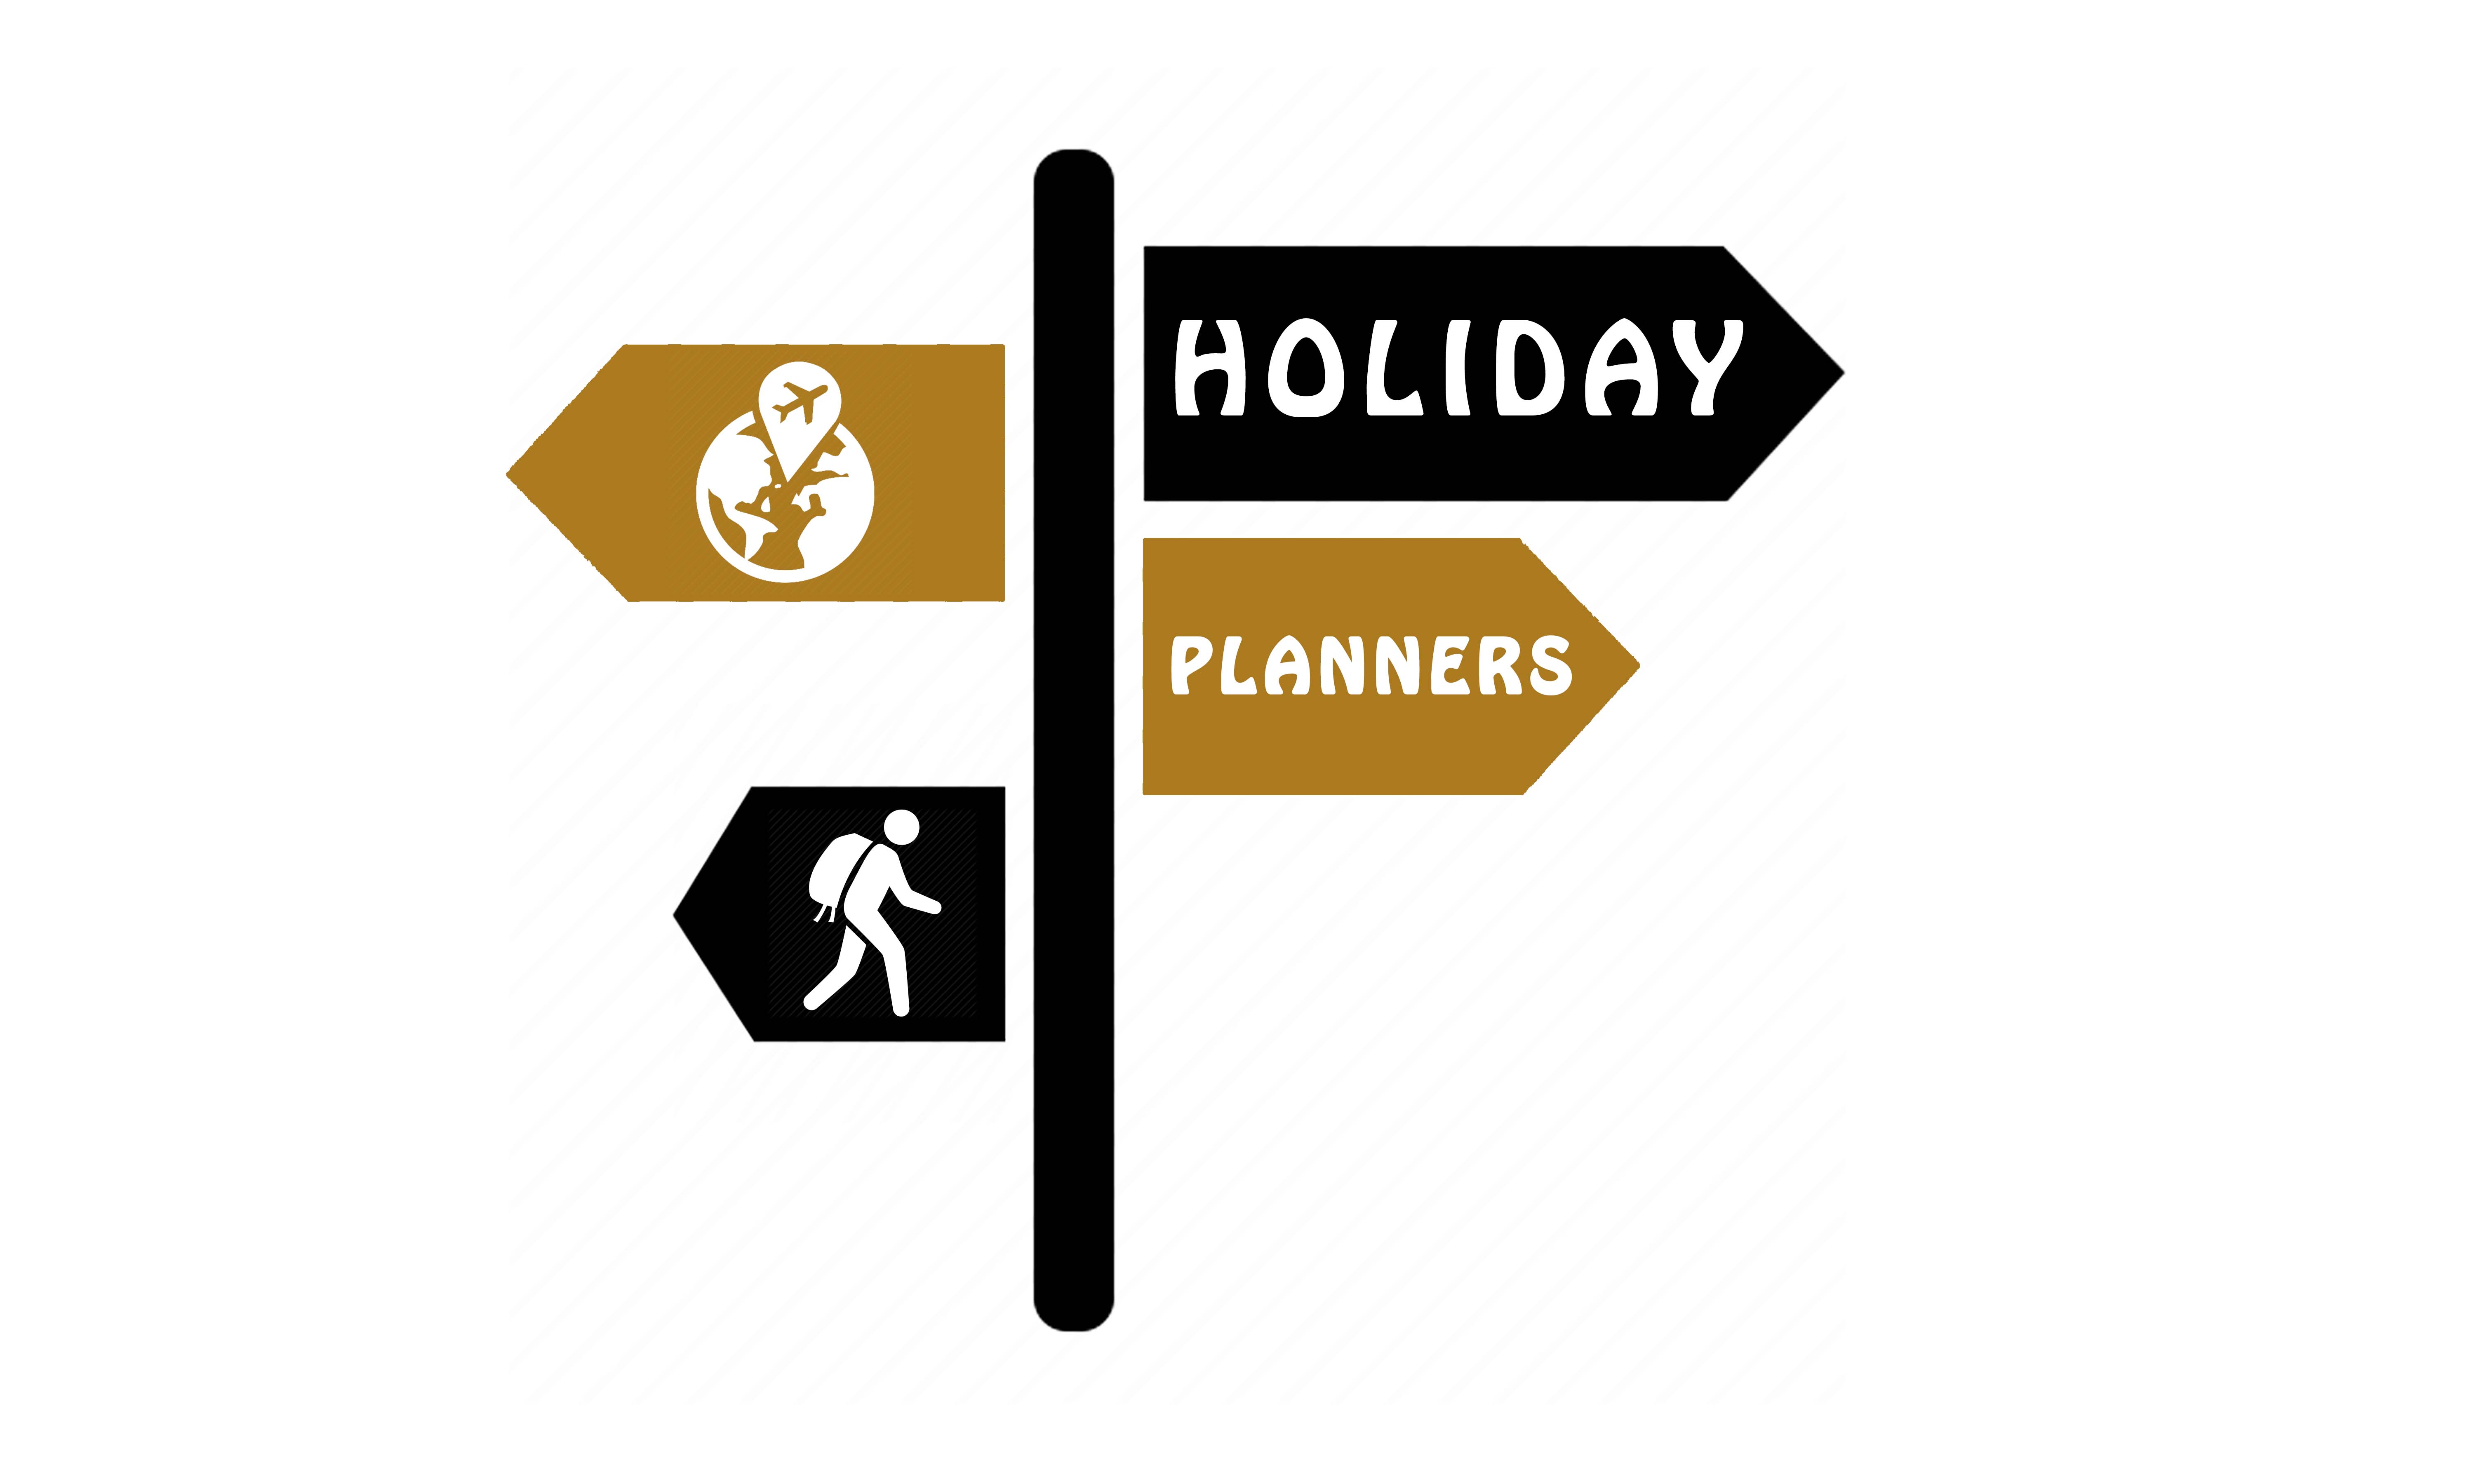 HOLIDAY PLANNRS